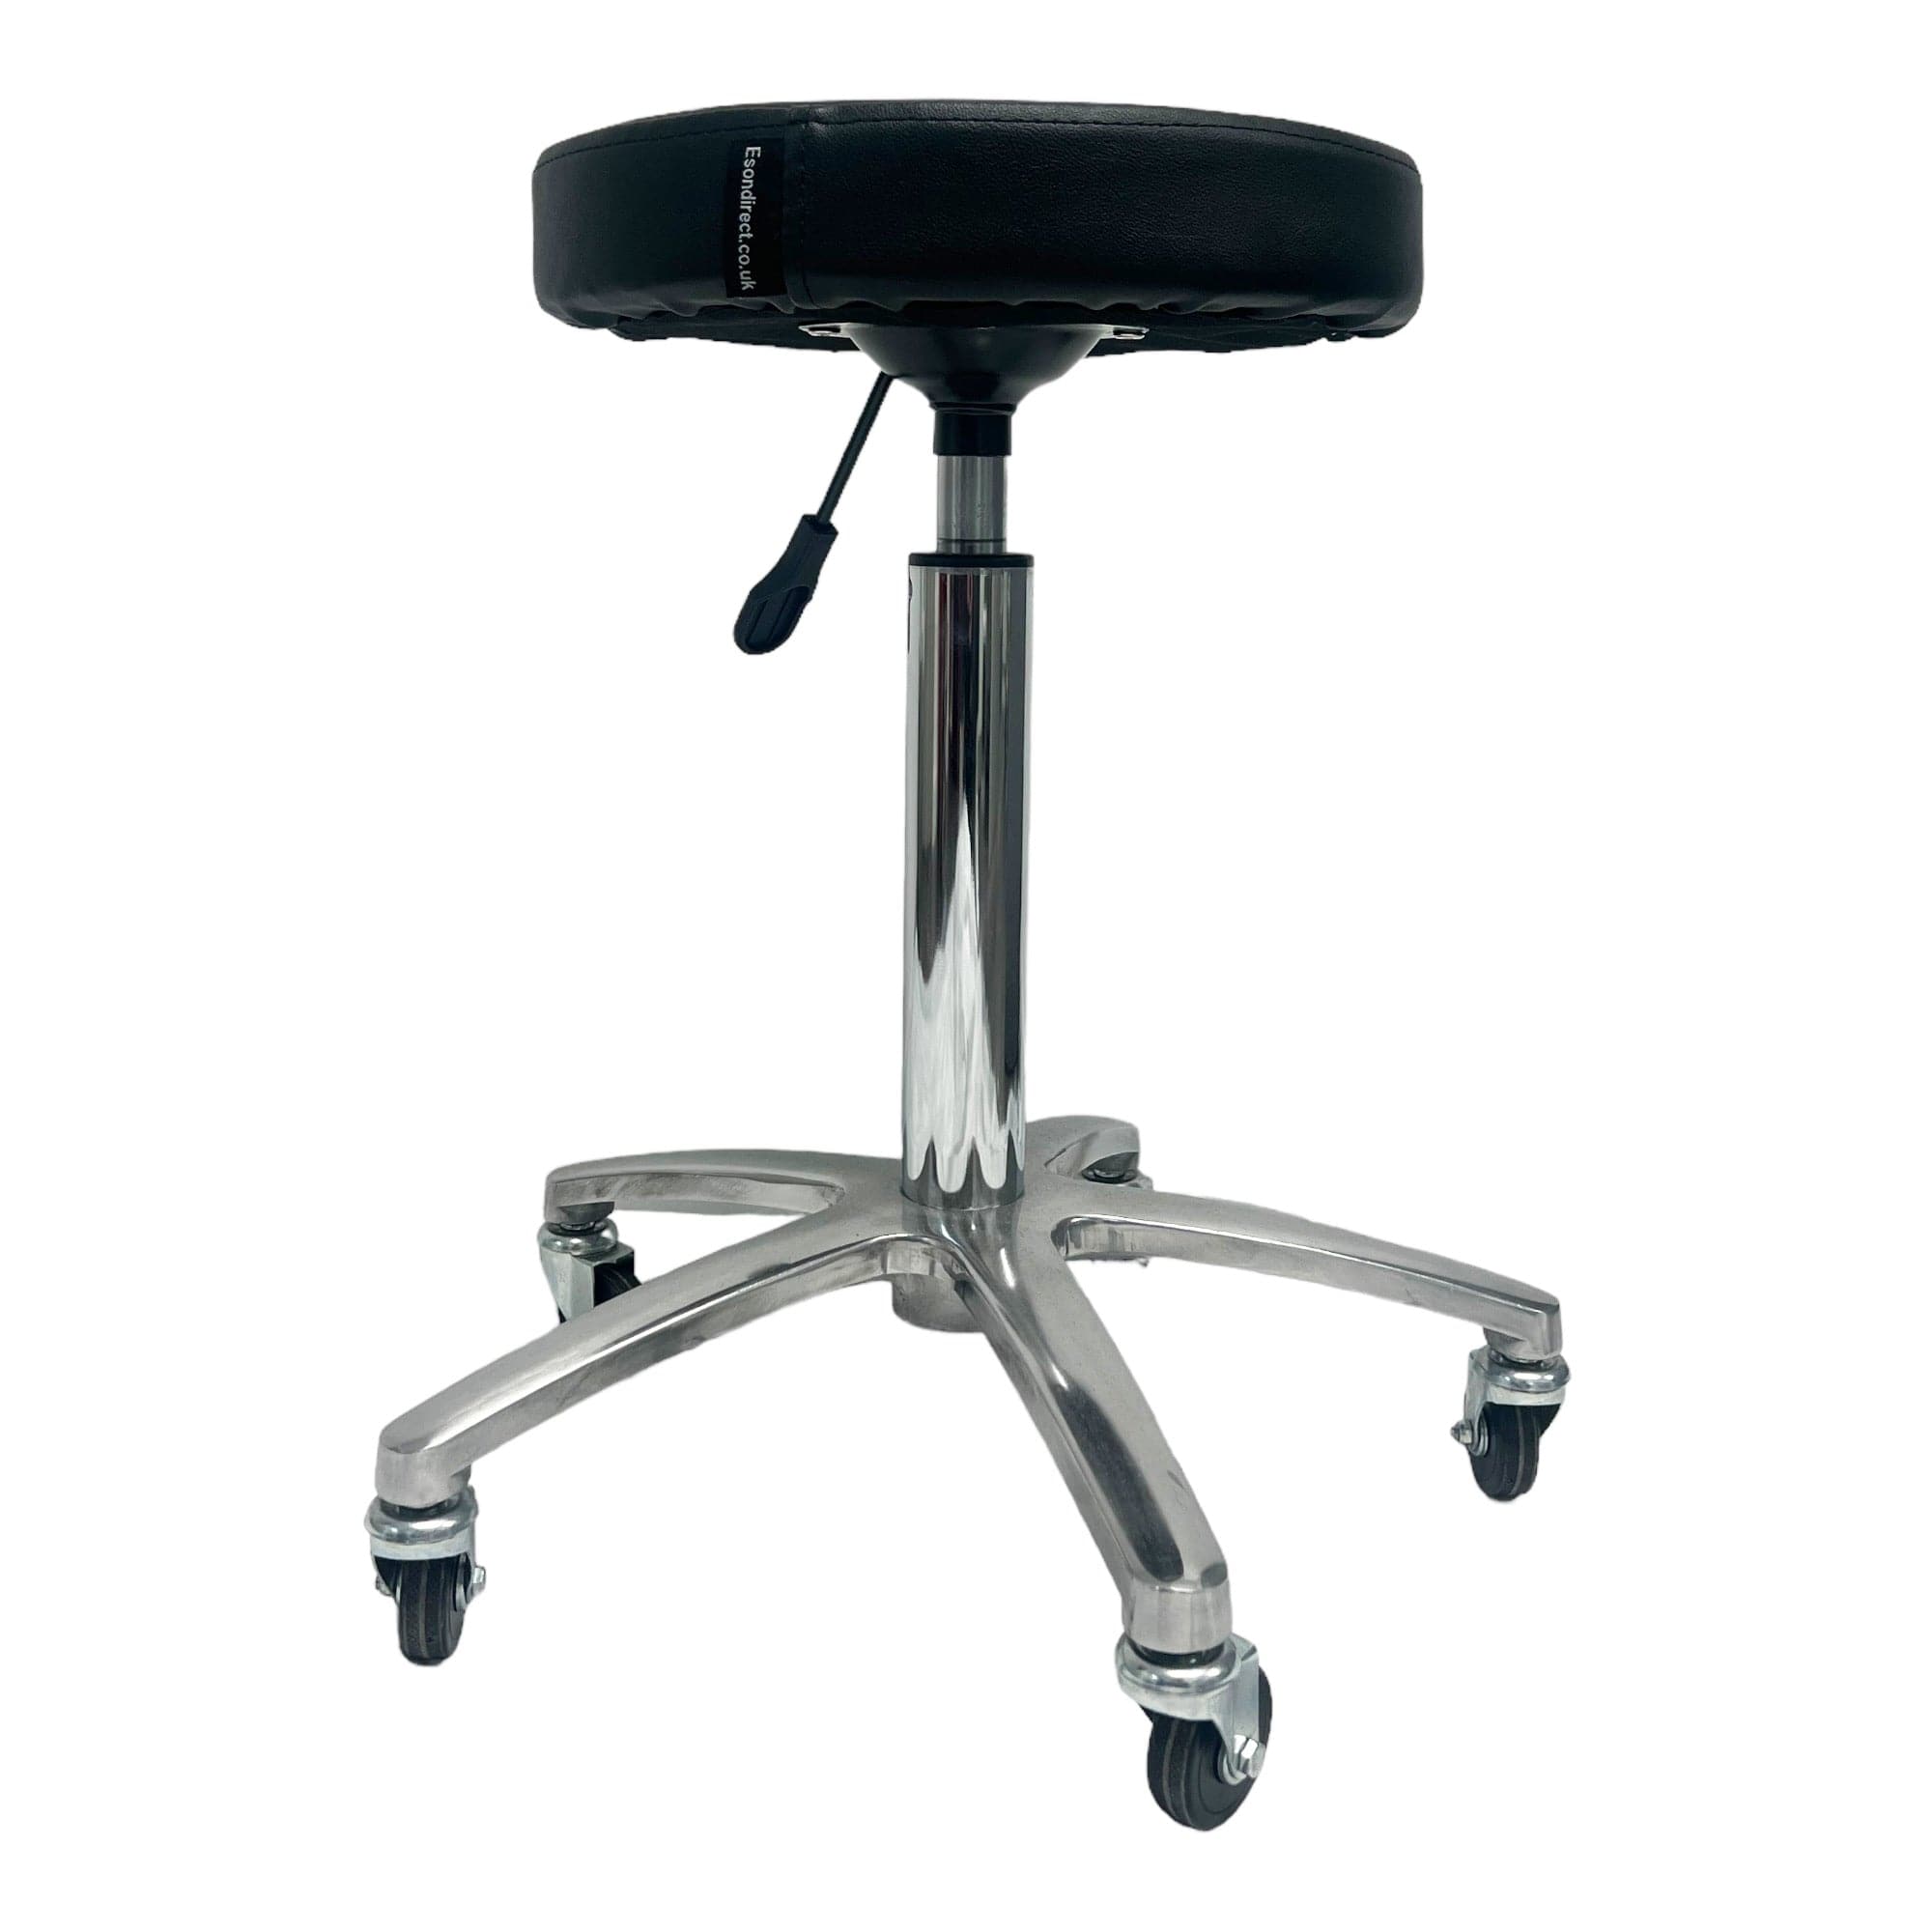 Eson - Classic Round Stool Chair Adjustable Height & Swivel